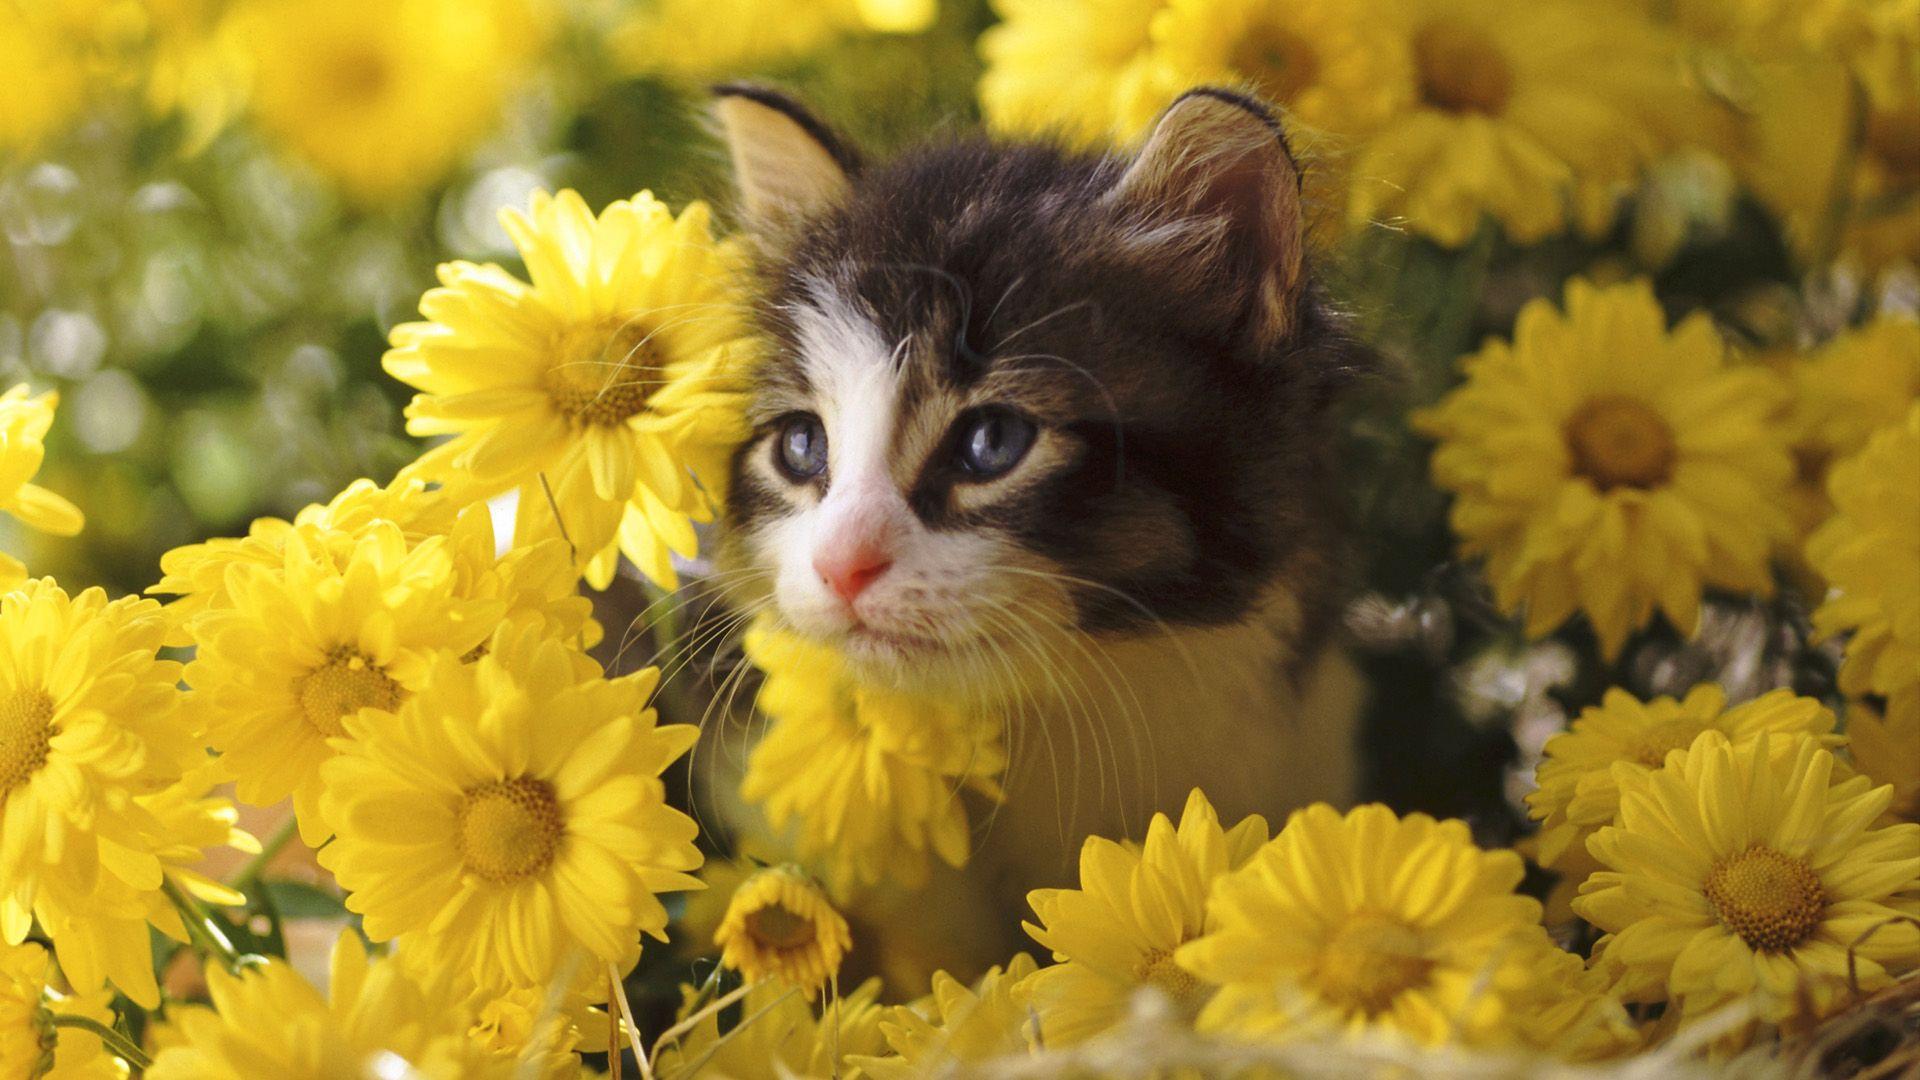 Cat and Flower Wallpaper Free Cat and Flower Background